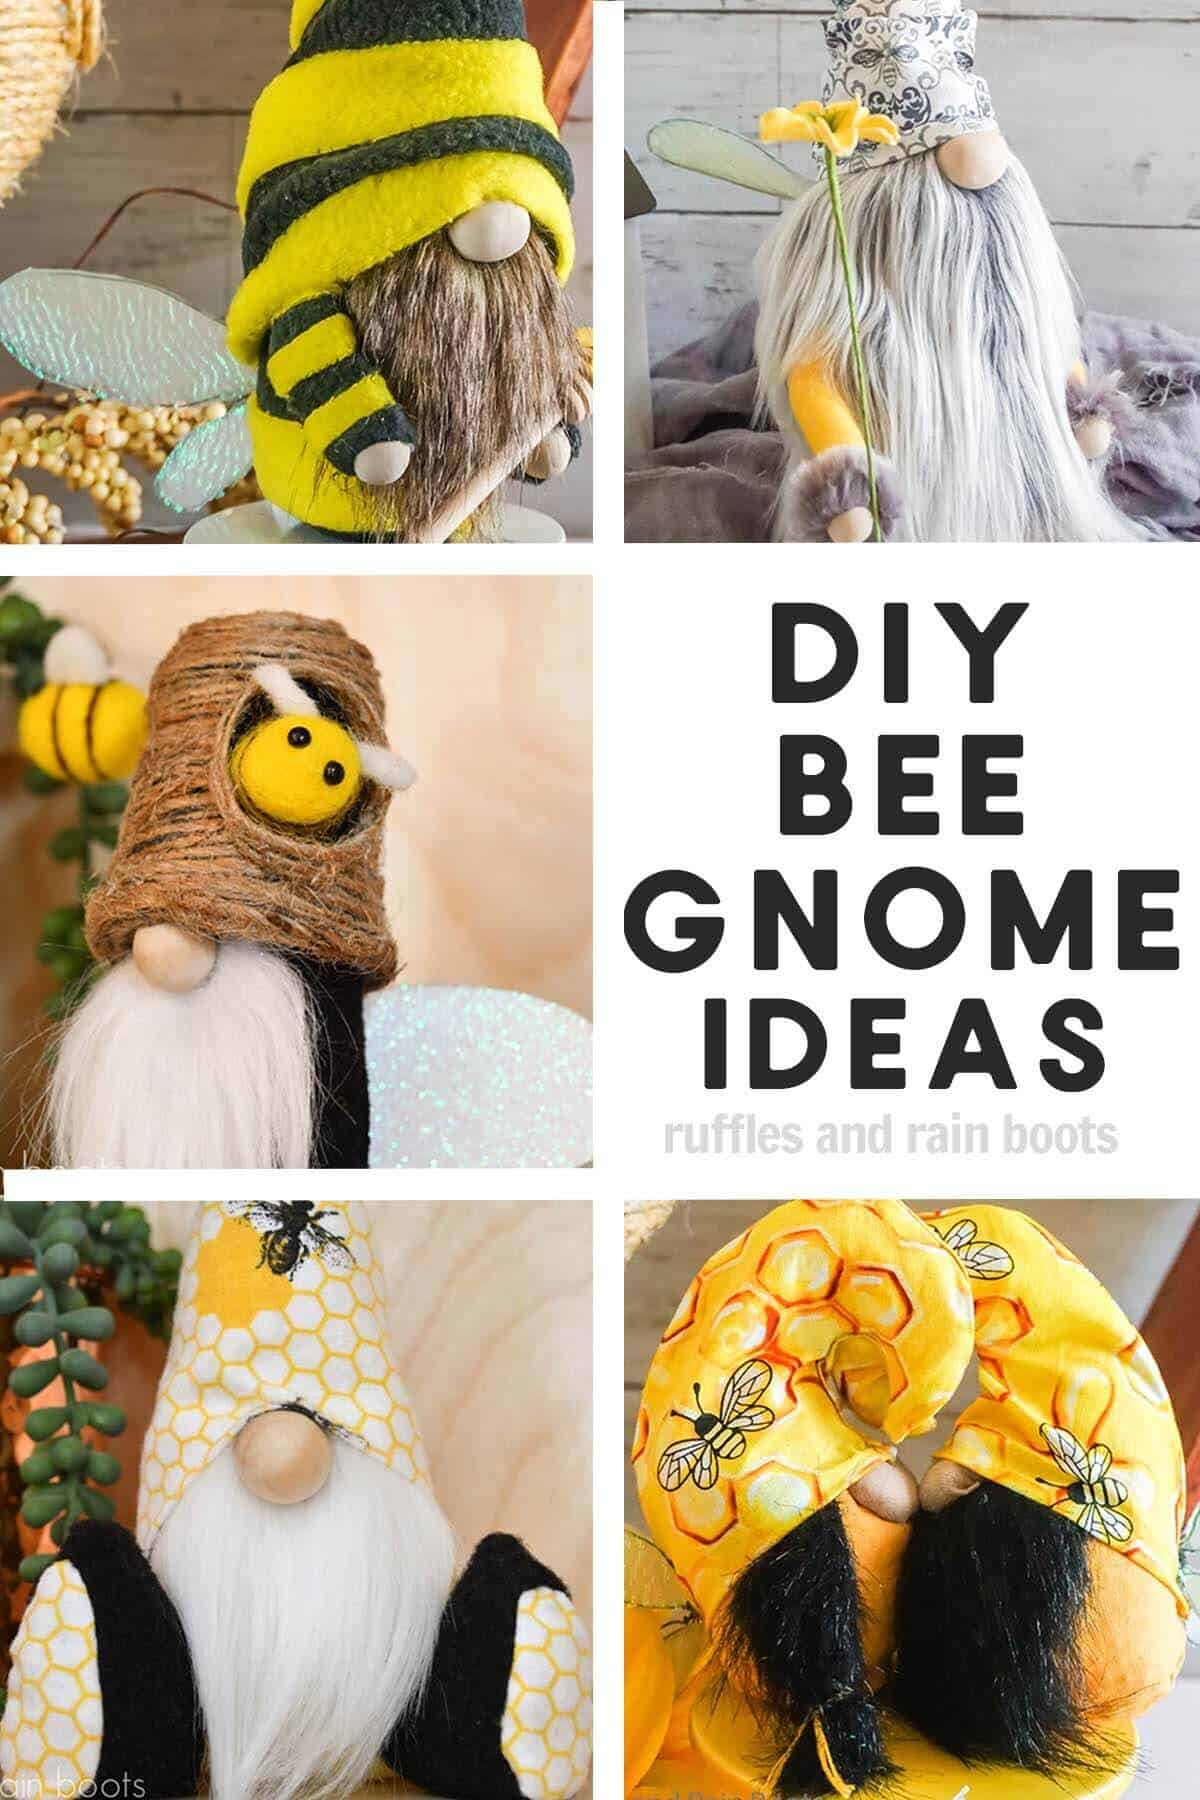 Five image vertical collage showing adorable bee gnomes with wings, bee skeps, and honey dippers.